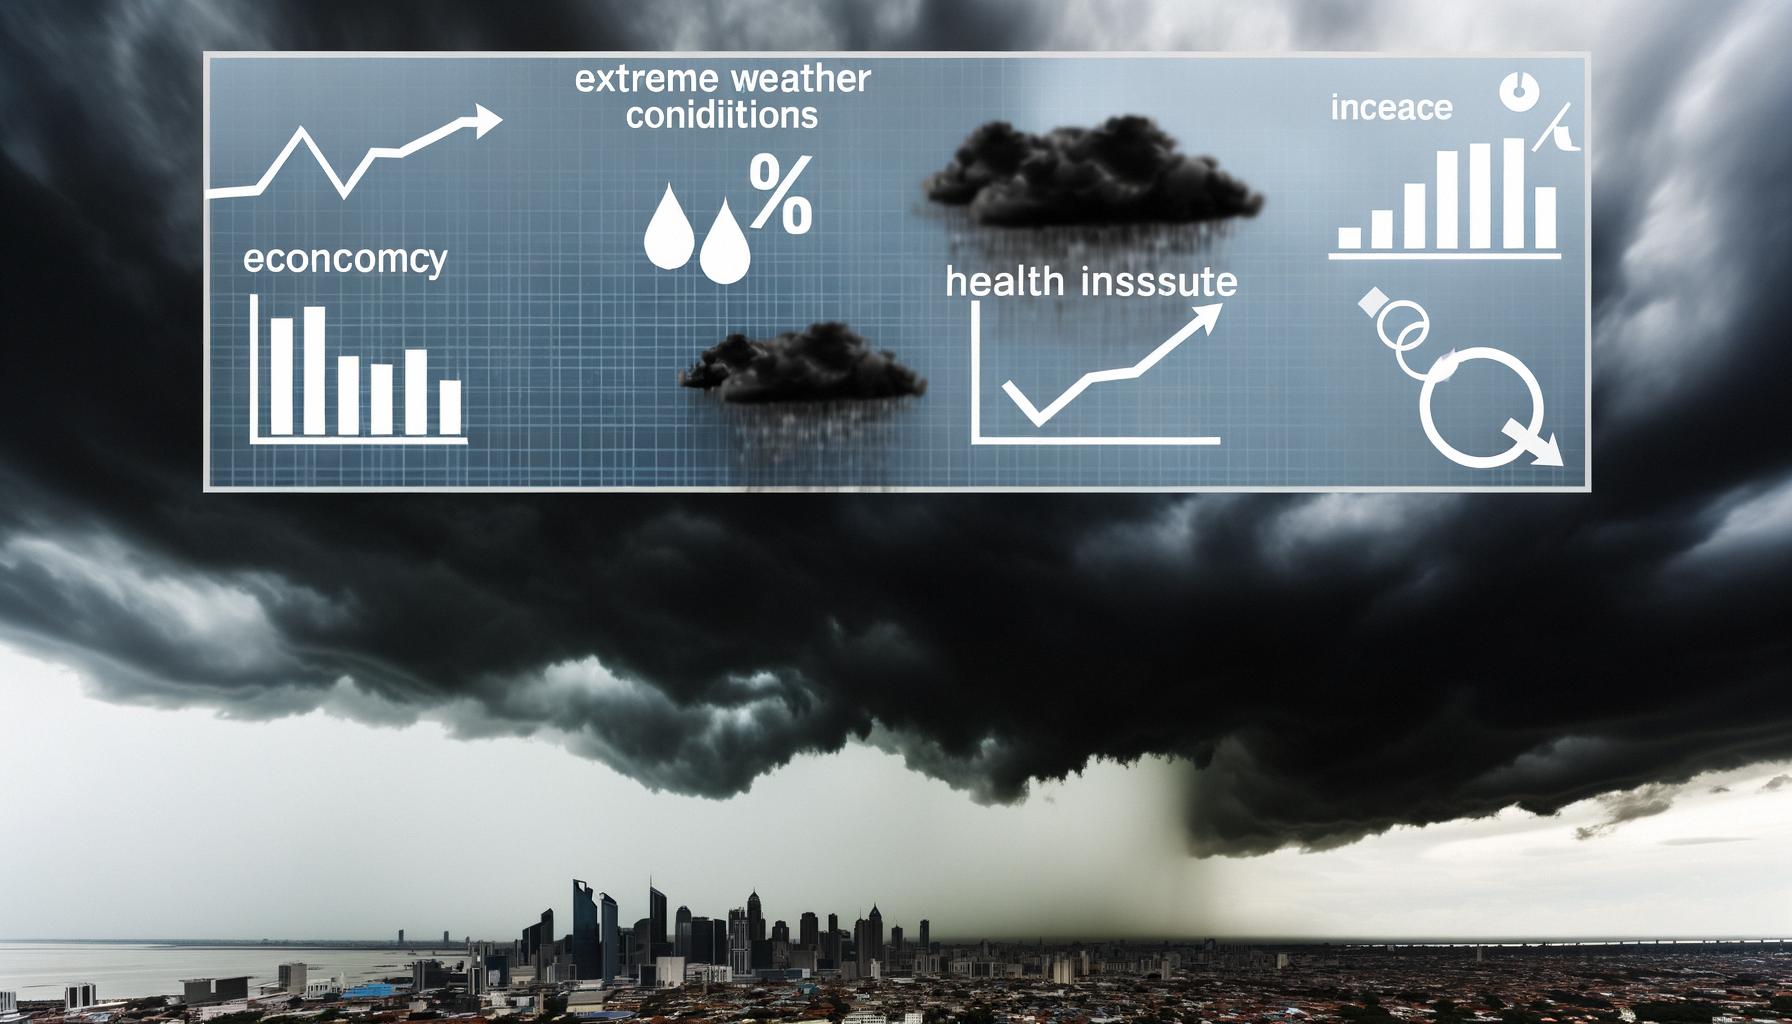 Extreme weather worsening due to climate change impacts economies and health globally.